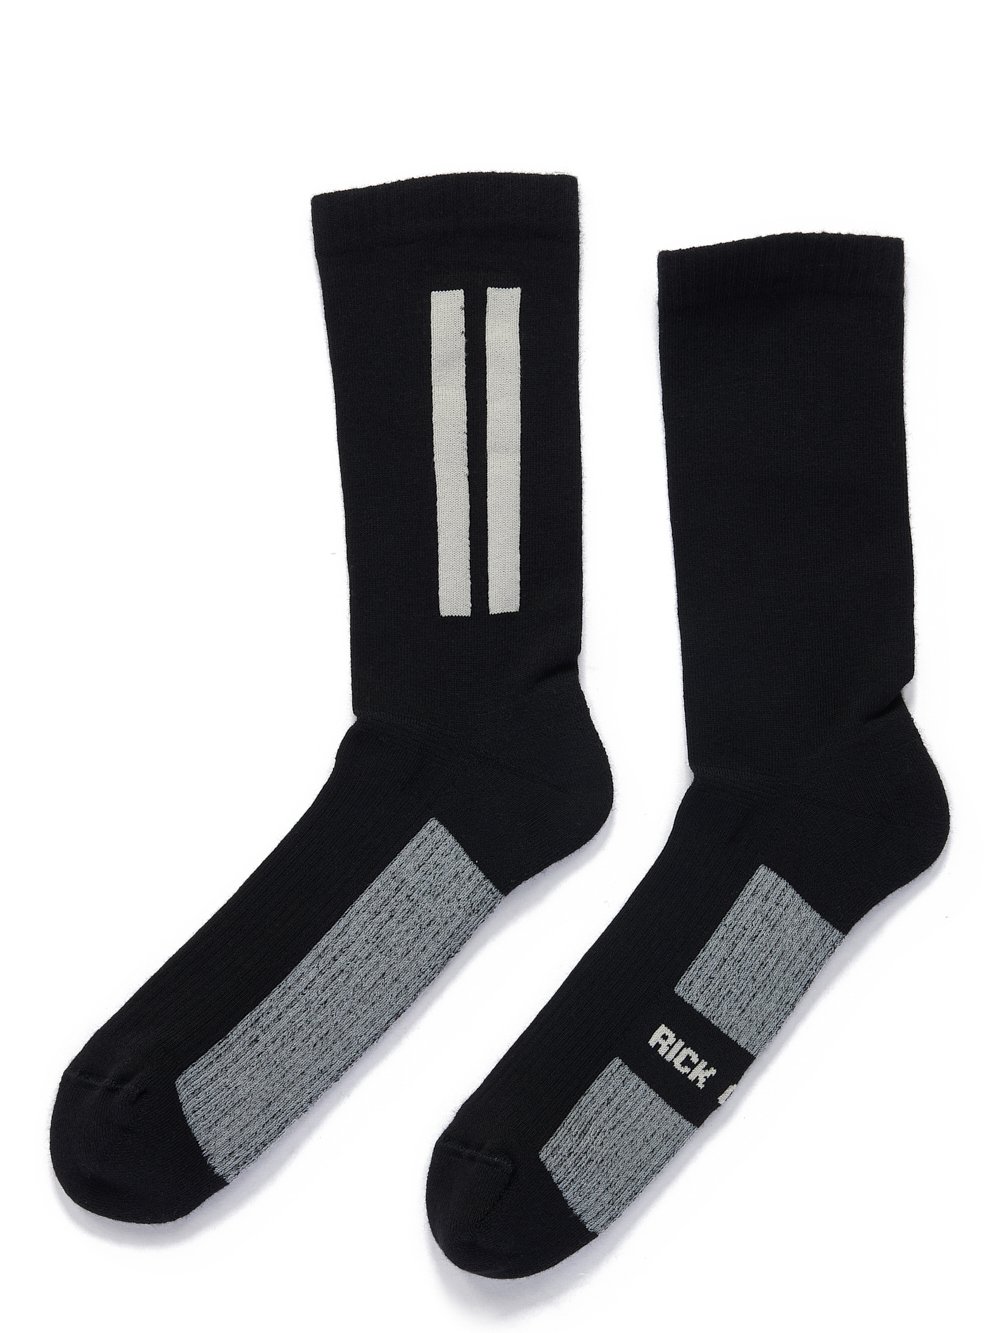 RICK OWENS FW23 LUXOR GLITTER SOCKS IN BLACK AND PEARL COTTON KNIT